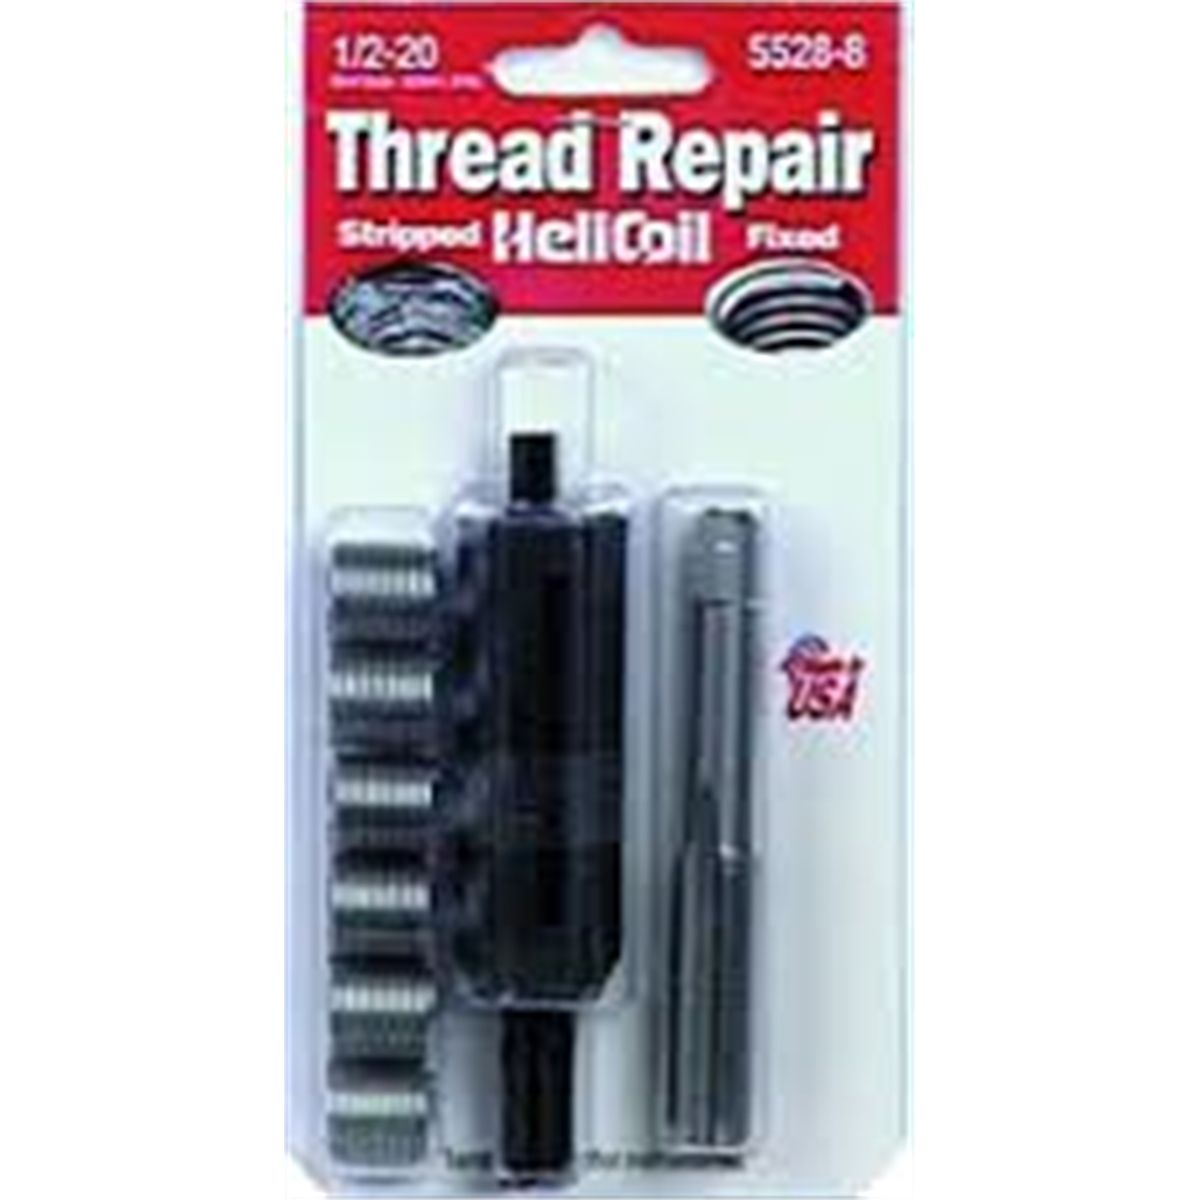 Helicoil Thread Repair Kit 5521-8 With Inserts 1/2-13 for sale online